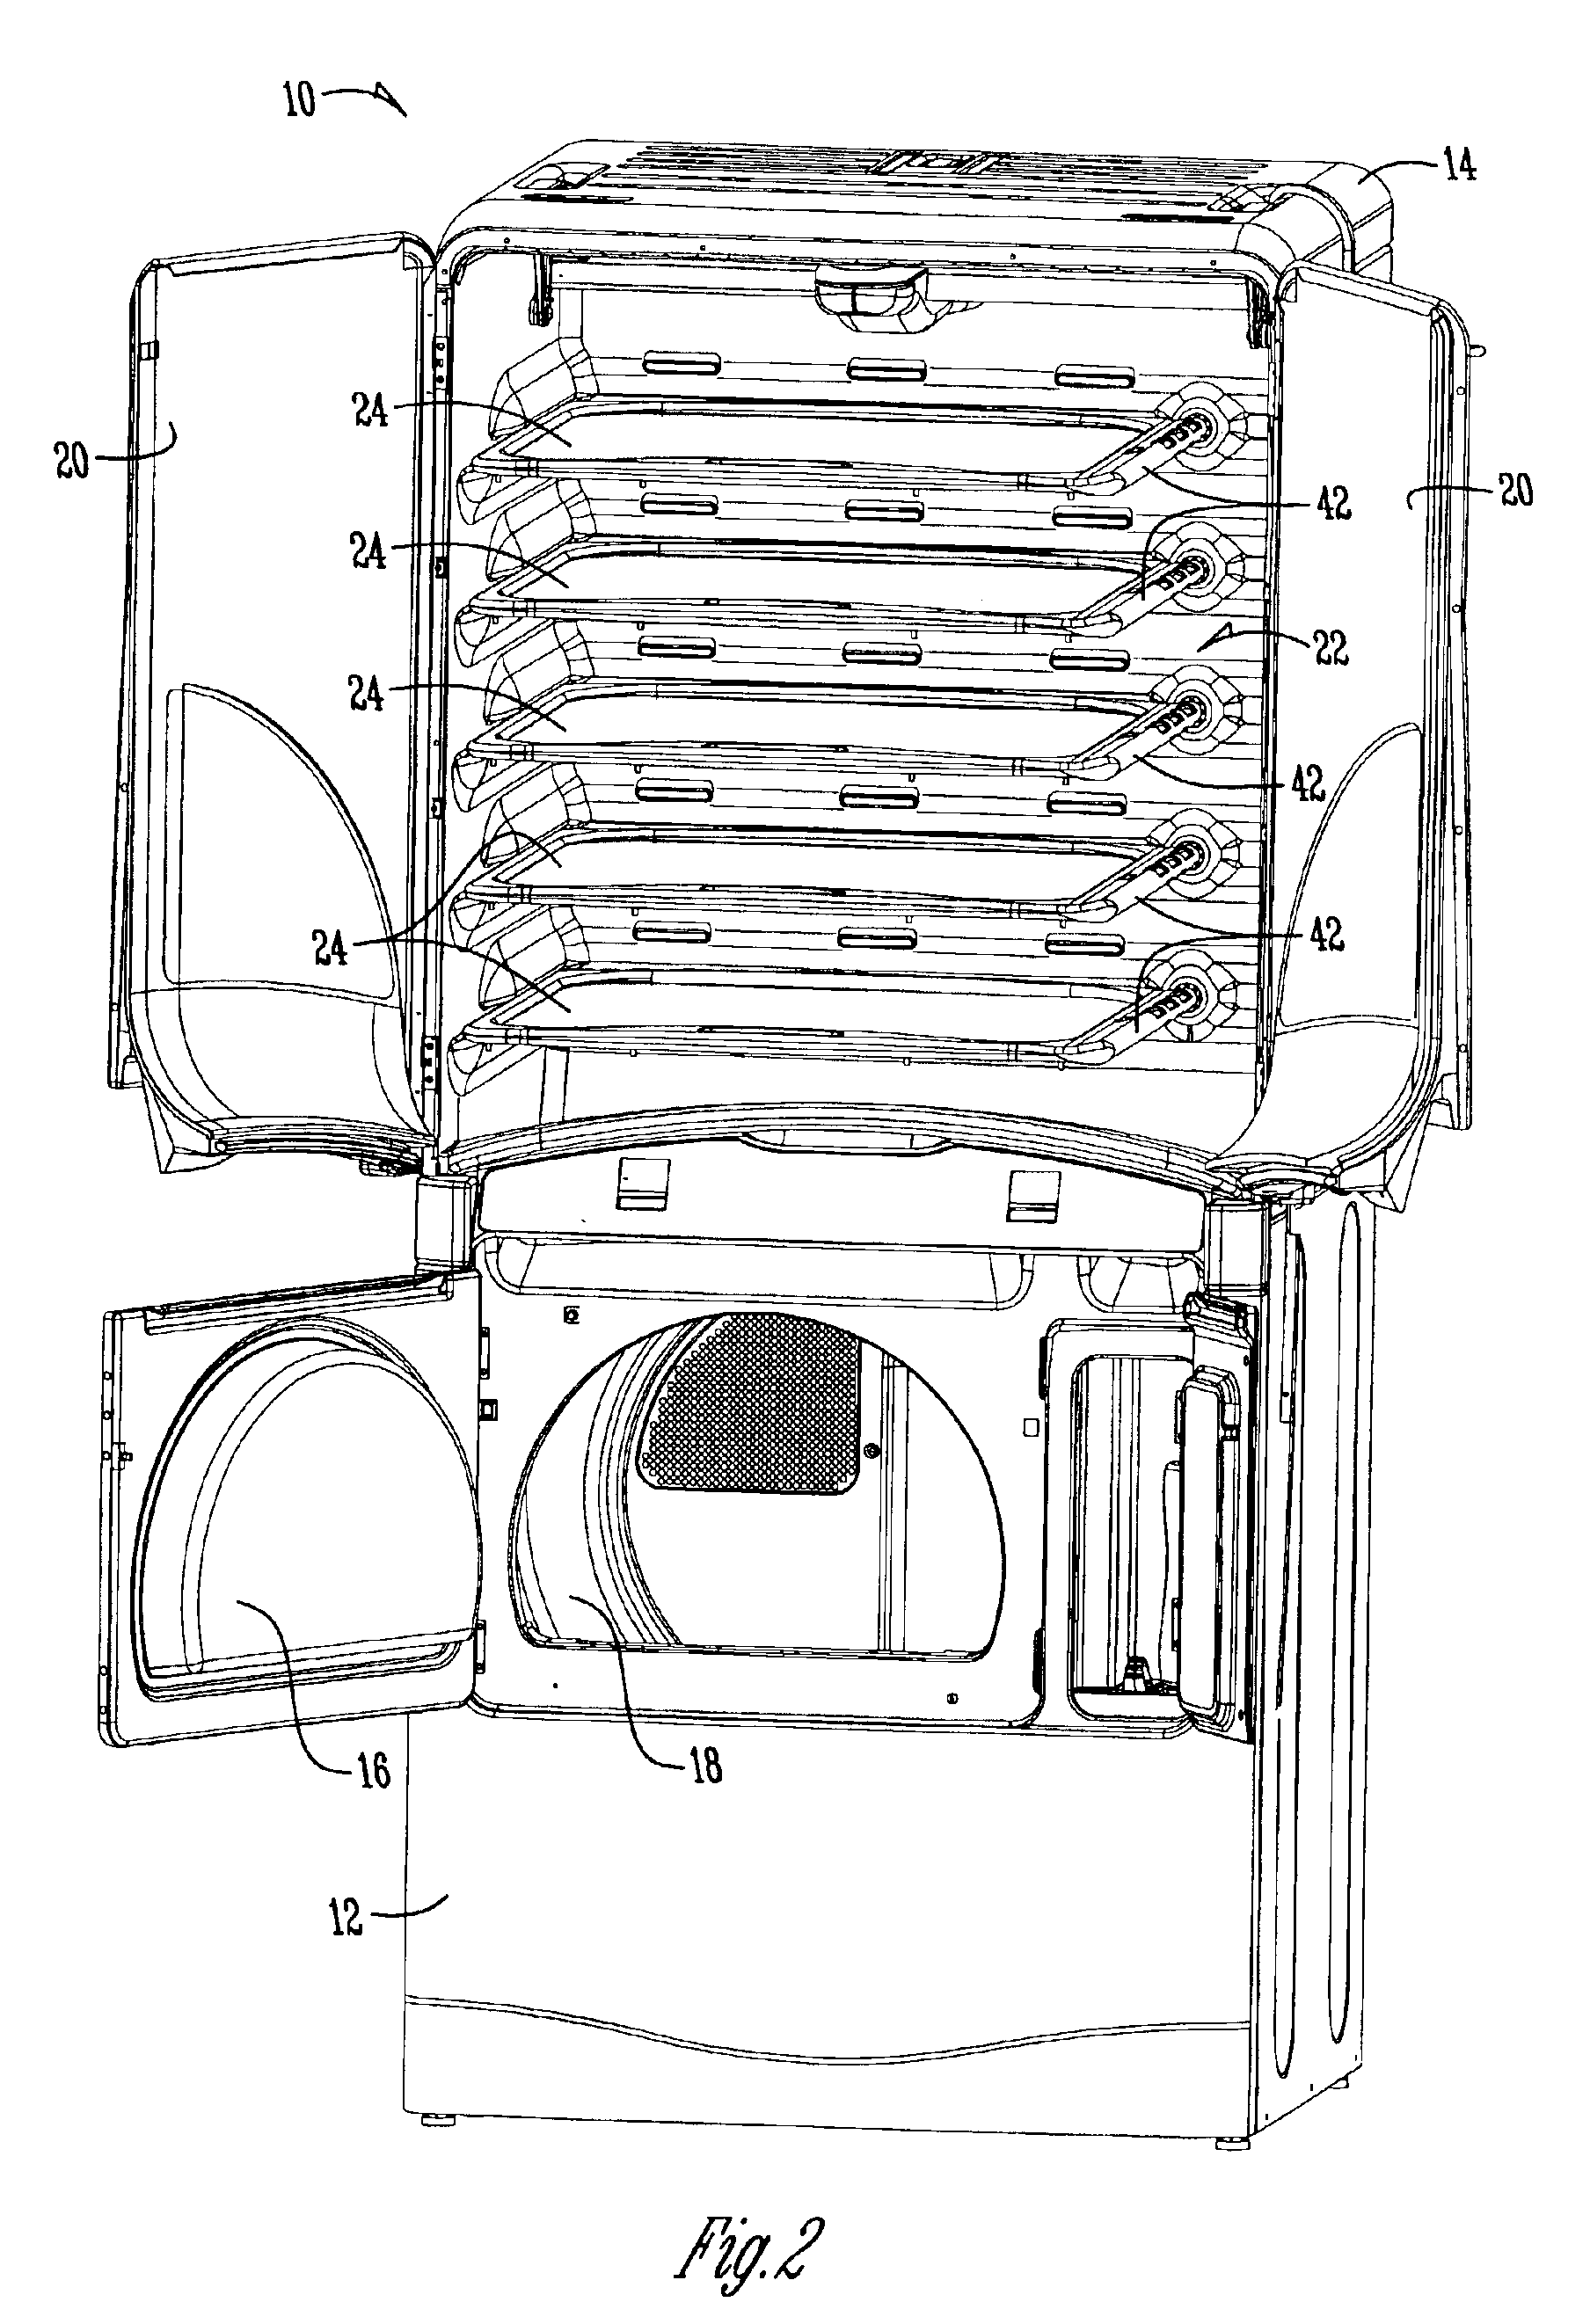 Clothes drying cabinet with improved air distribution